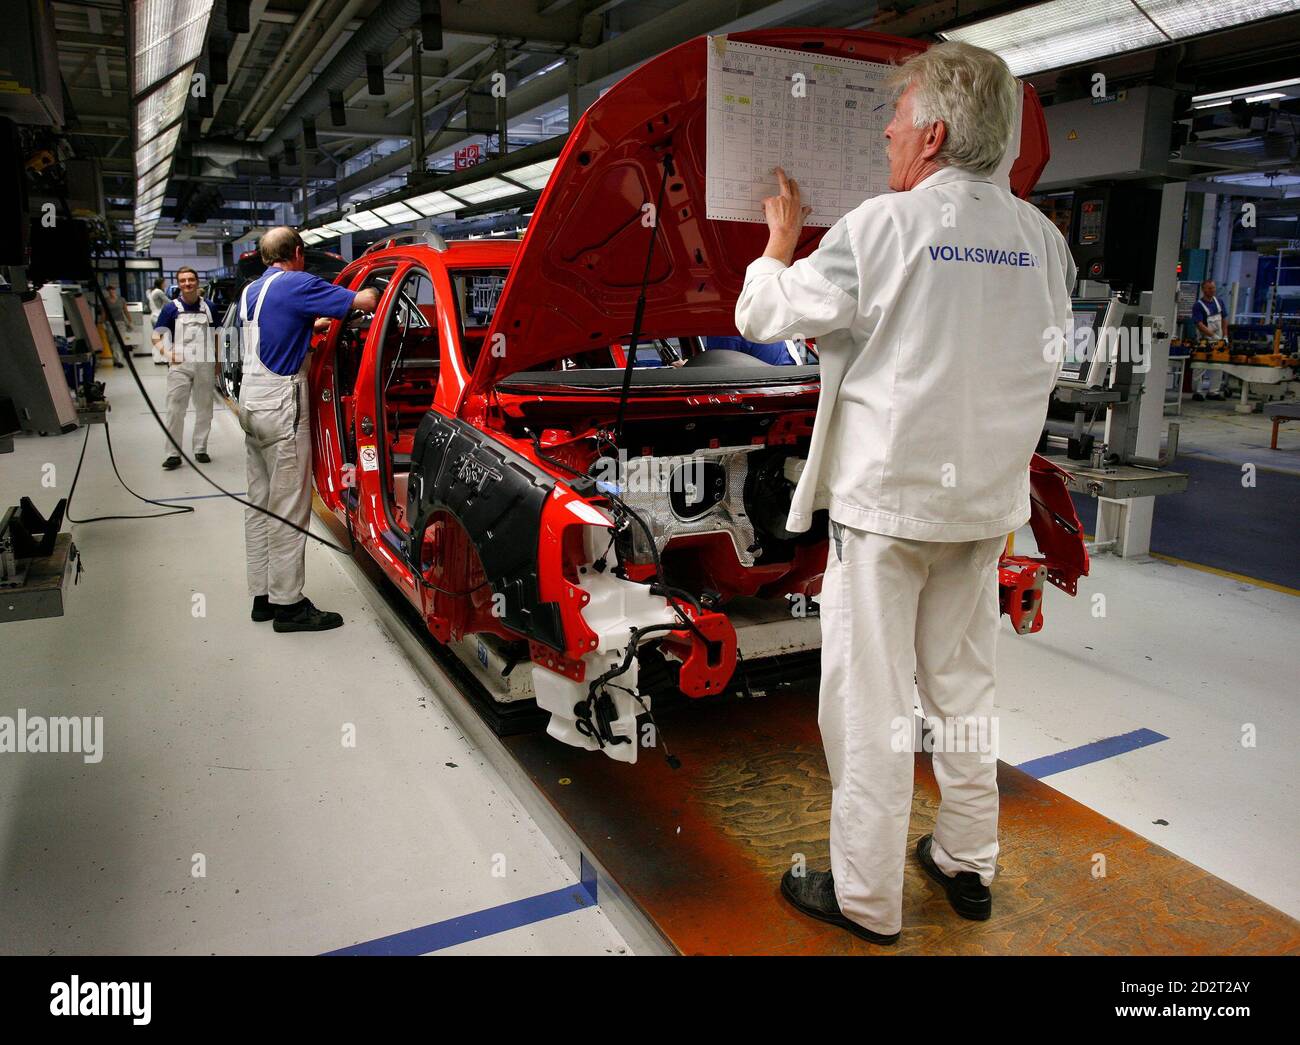 Volkswagen employees work on a VW Passat at the construction line of Volkswagen plant in Emden April 24, 2009.   REUTERS/Christian Charisius (GERMANY TRANSPORT BUSINESS) Stock Photo